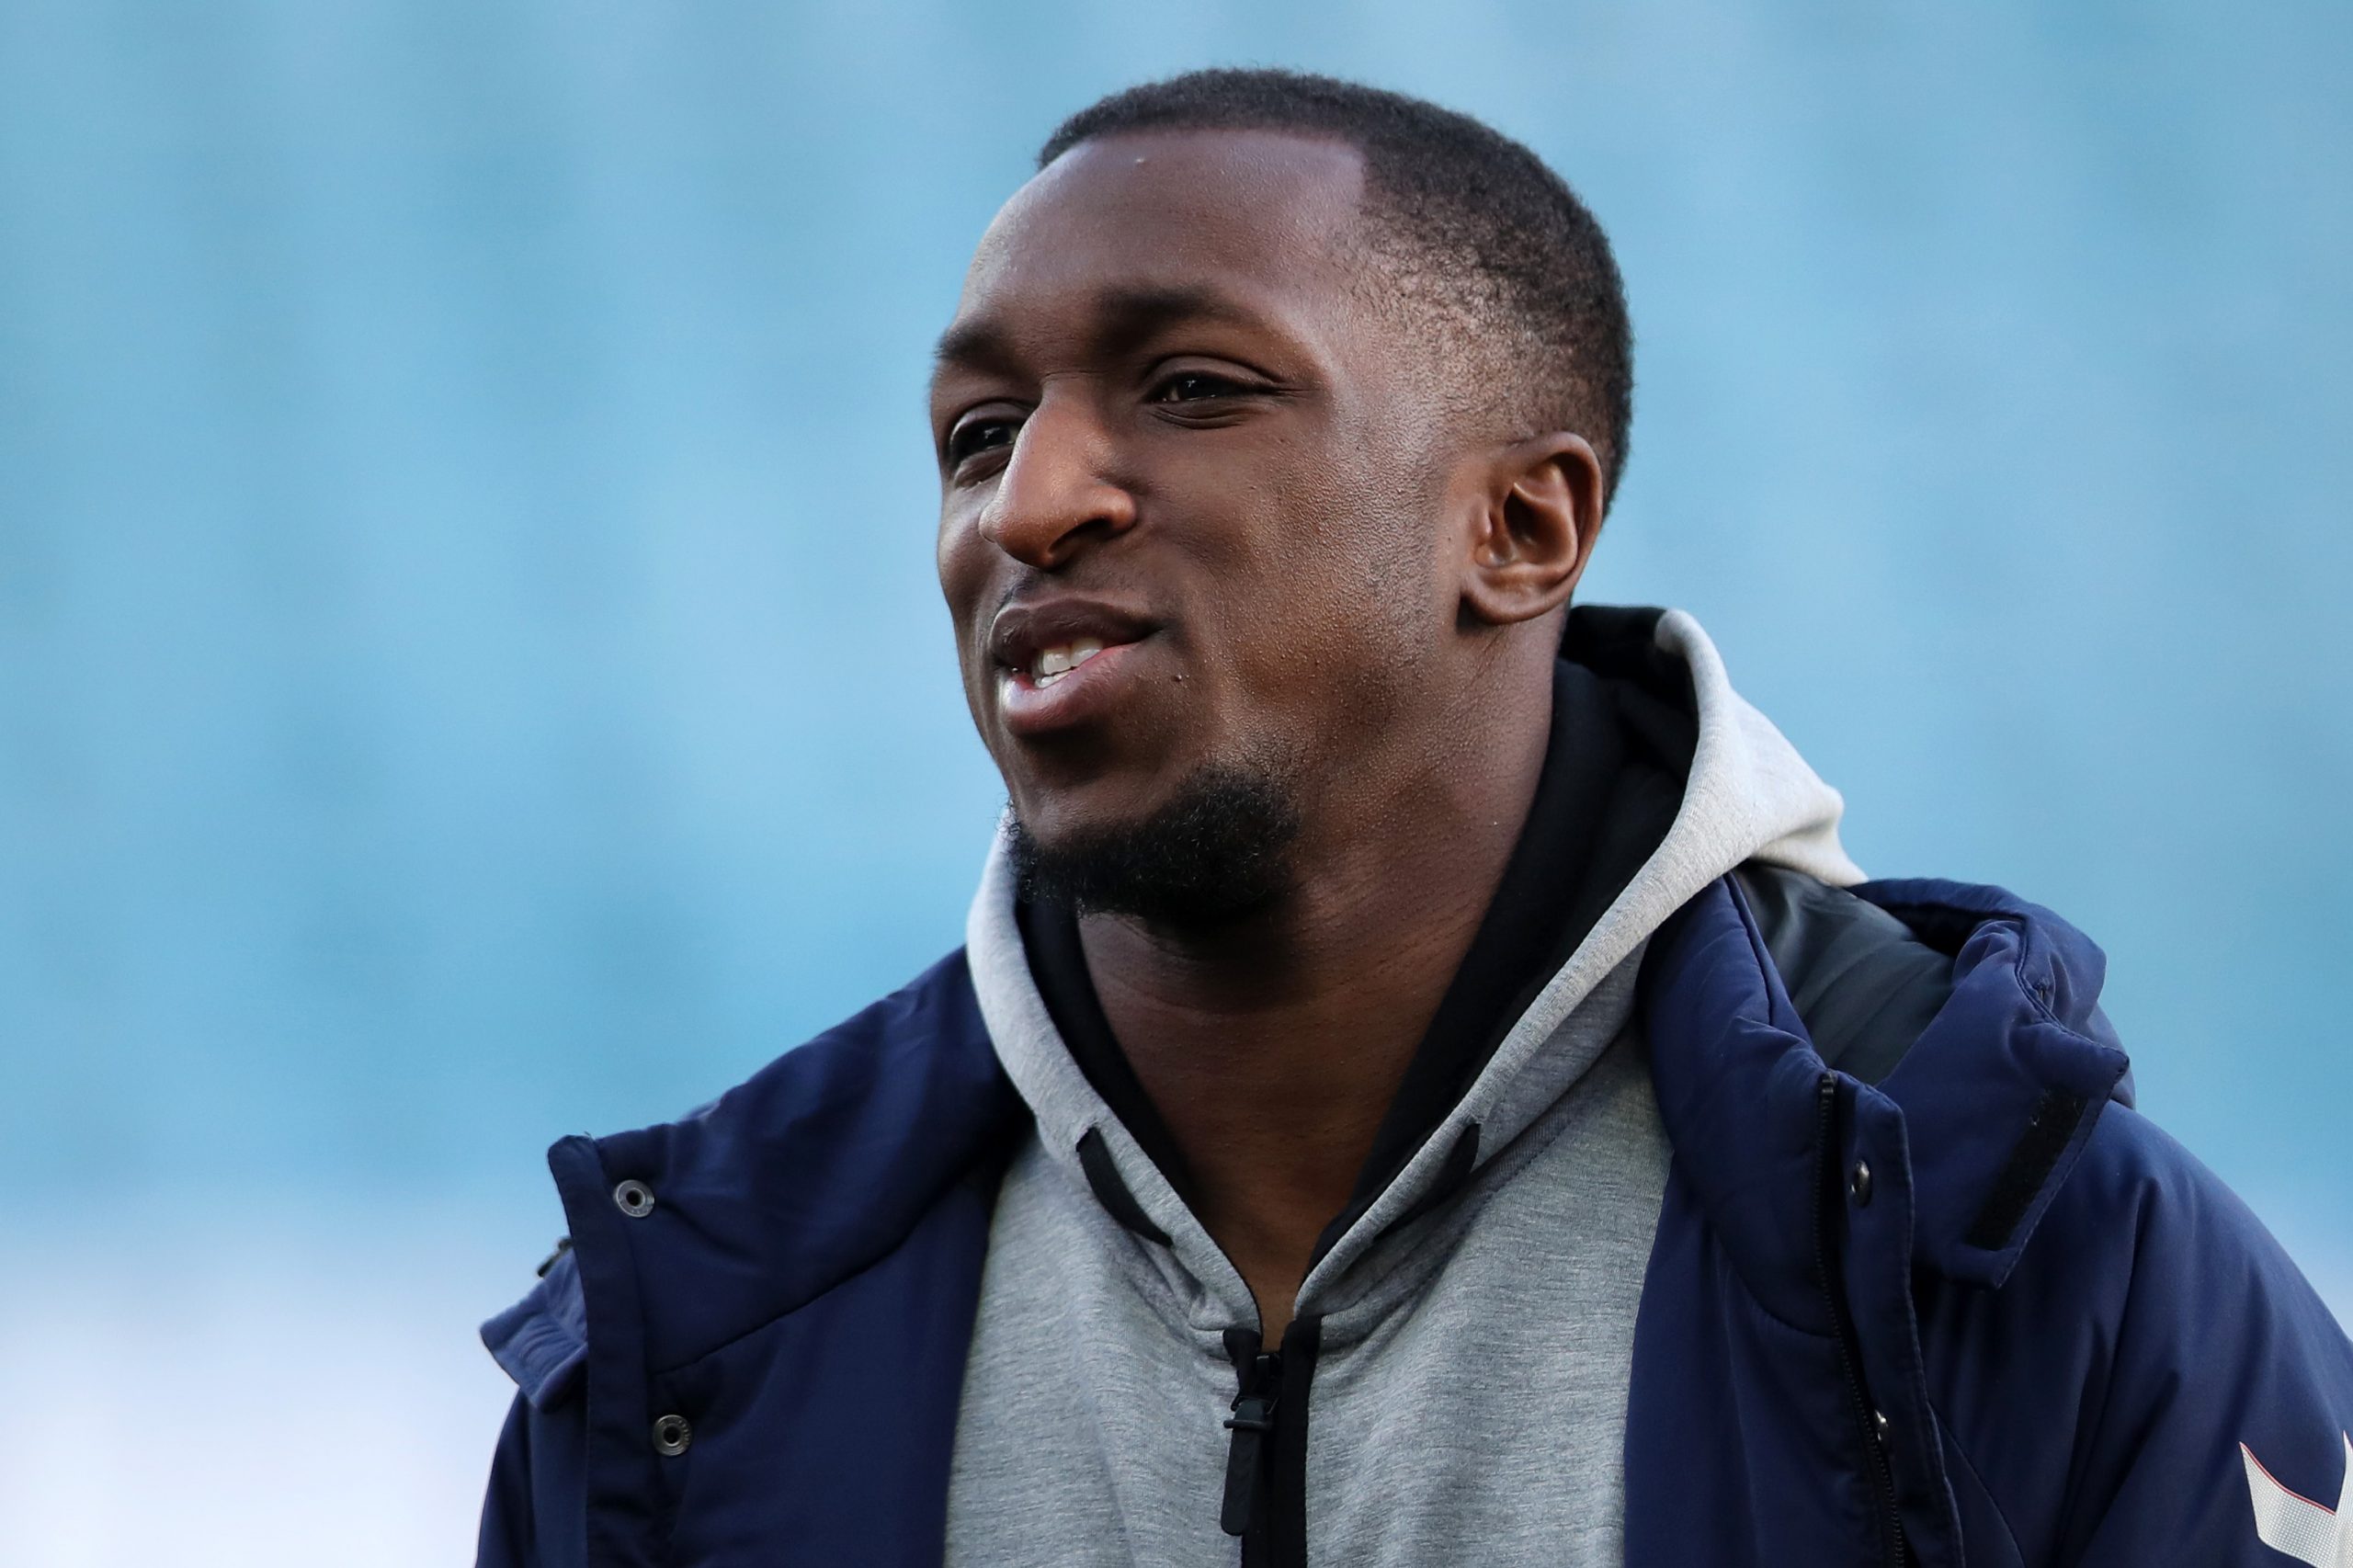 KILMARNOCK, SCOTLAND - FEBRUARY 09: Glen Kamara of Rangers looks on prior to the Scottish Cup 5th Round match between Kilmarnock and Rangers at Rugby Park on February 9, 2019 in Kilmarnock, Scotland.